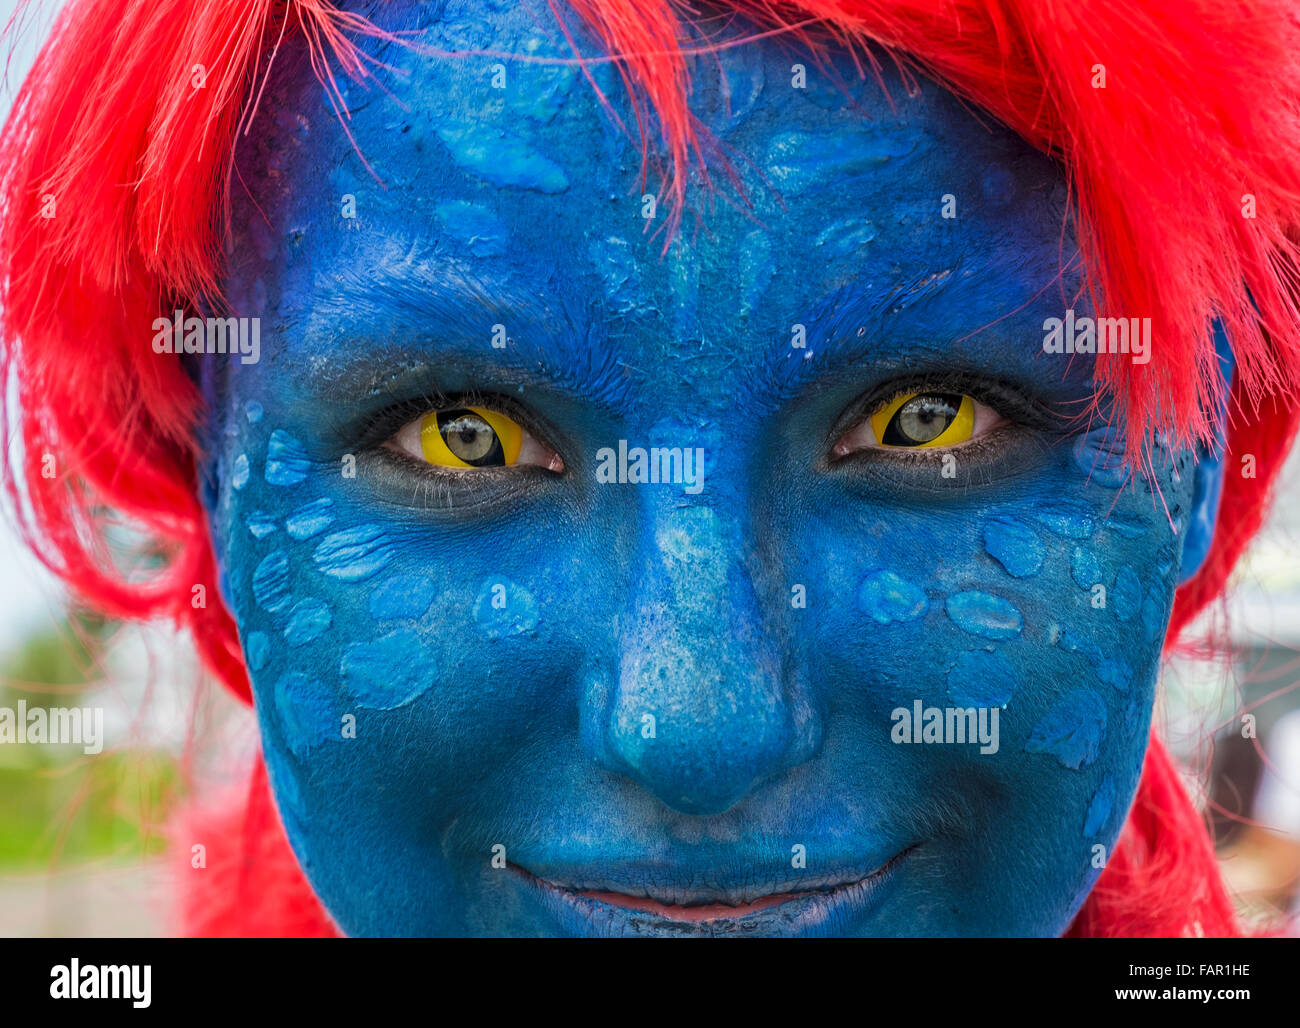 Teenage girl made up to like Mystique the Xmen comic character Stock Photo